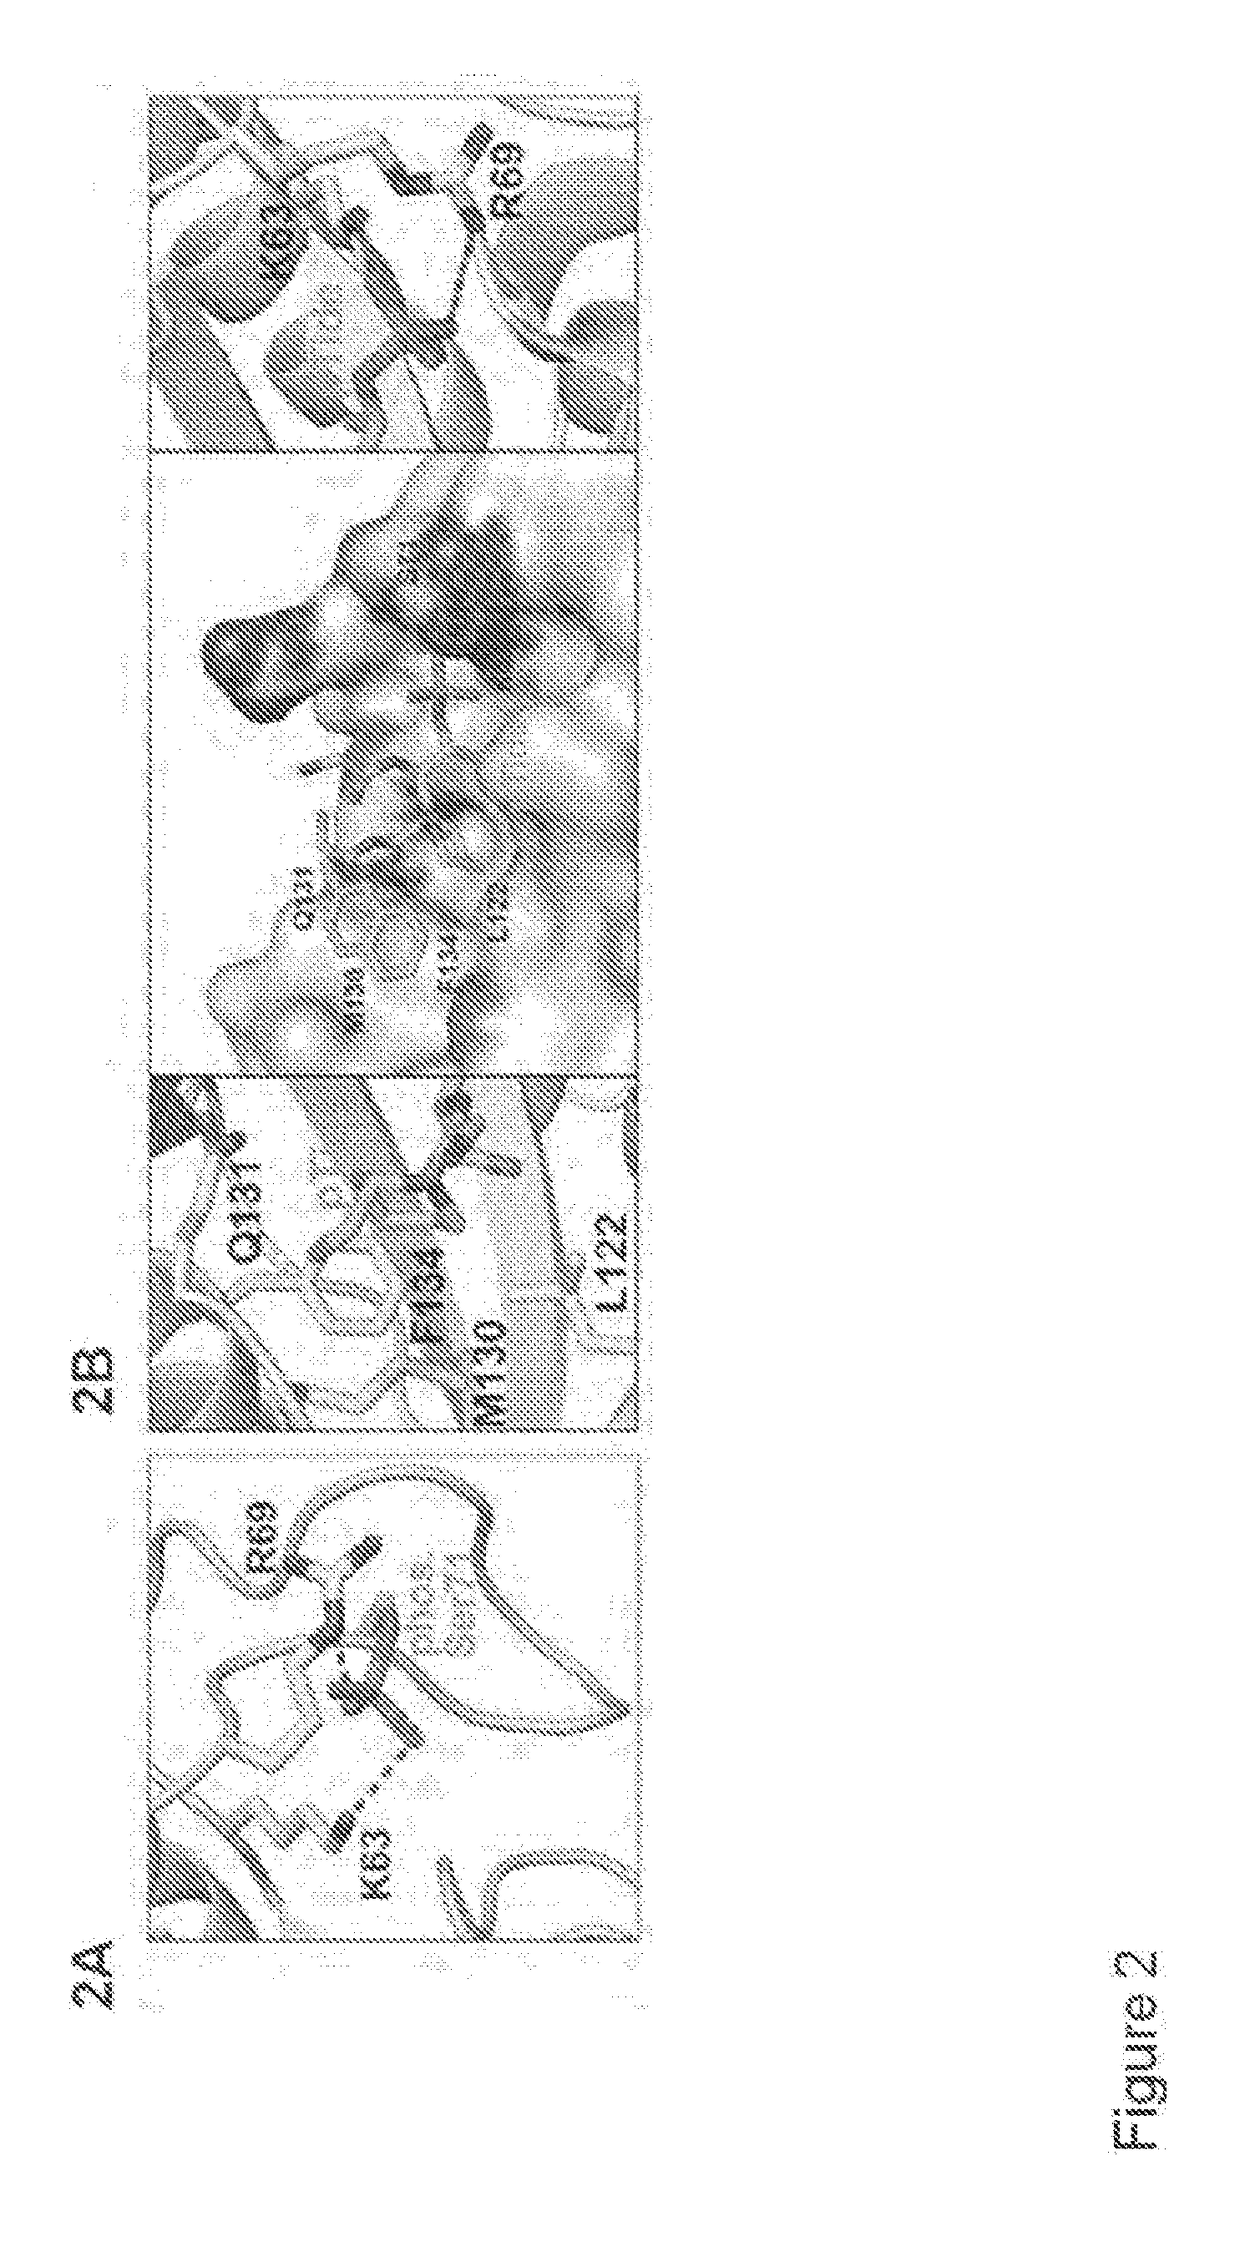 Enhanced atra-related compounds for the treatment of proliferative diseases, autoimmune diseases, and addiction conditions